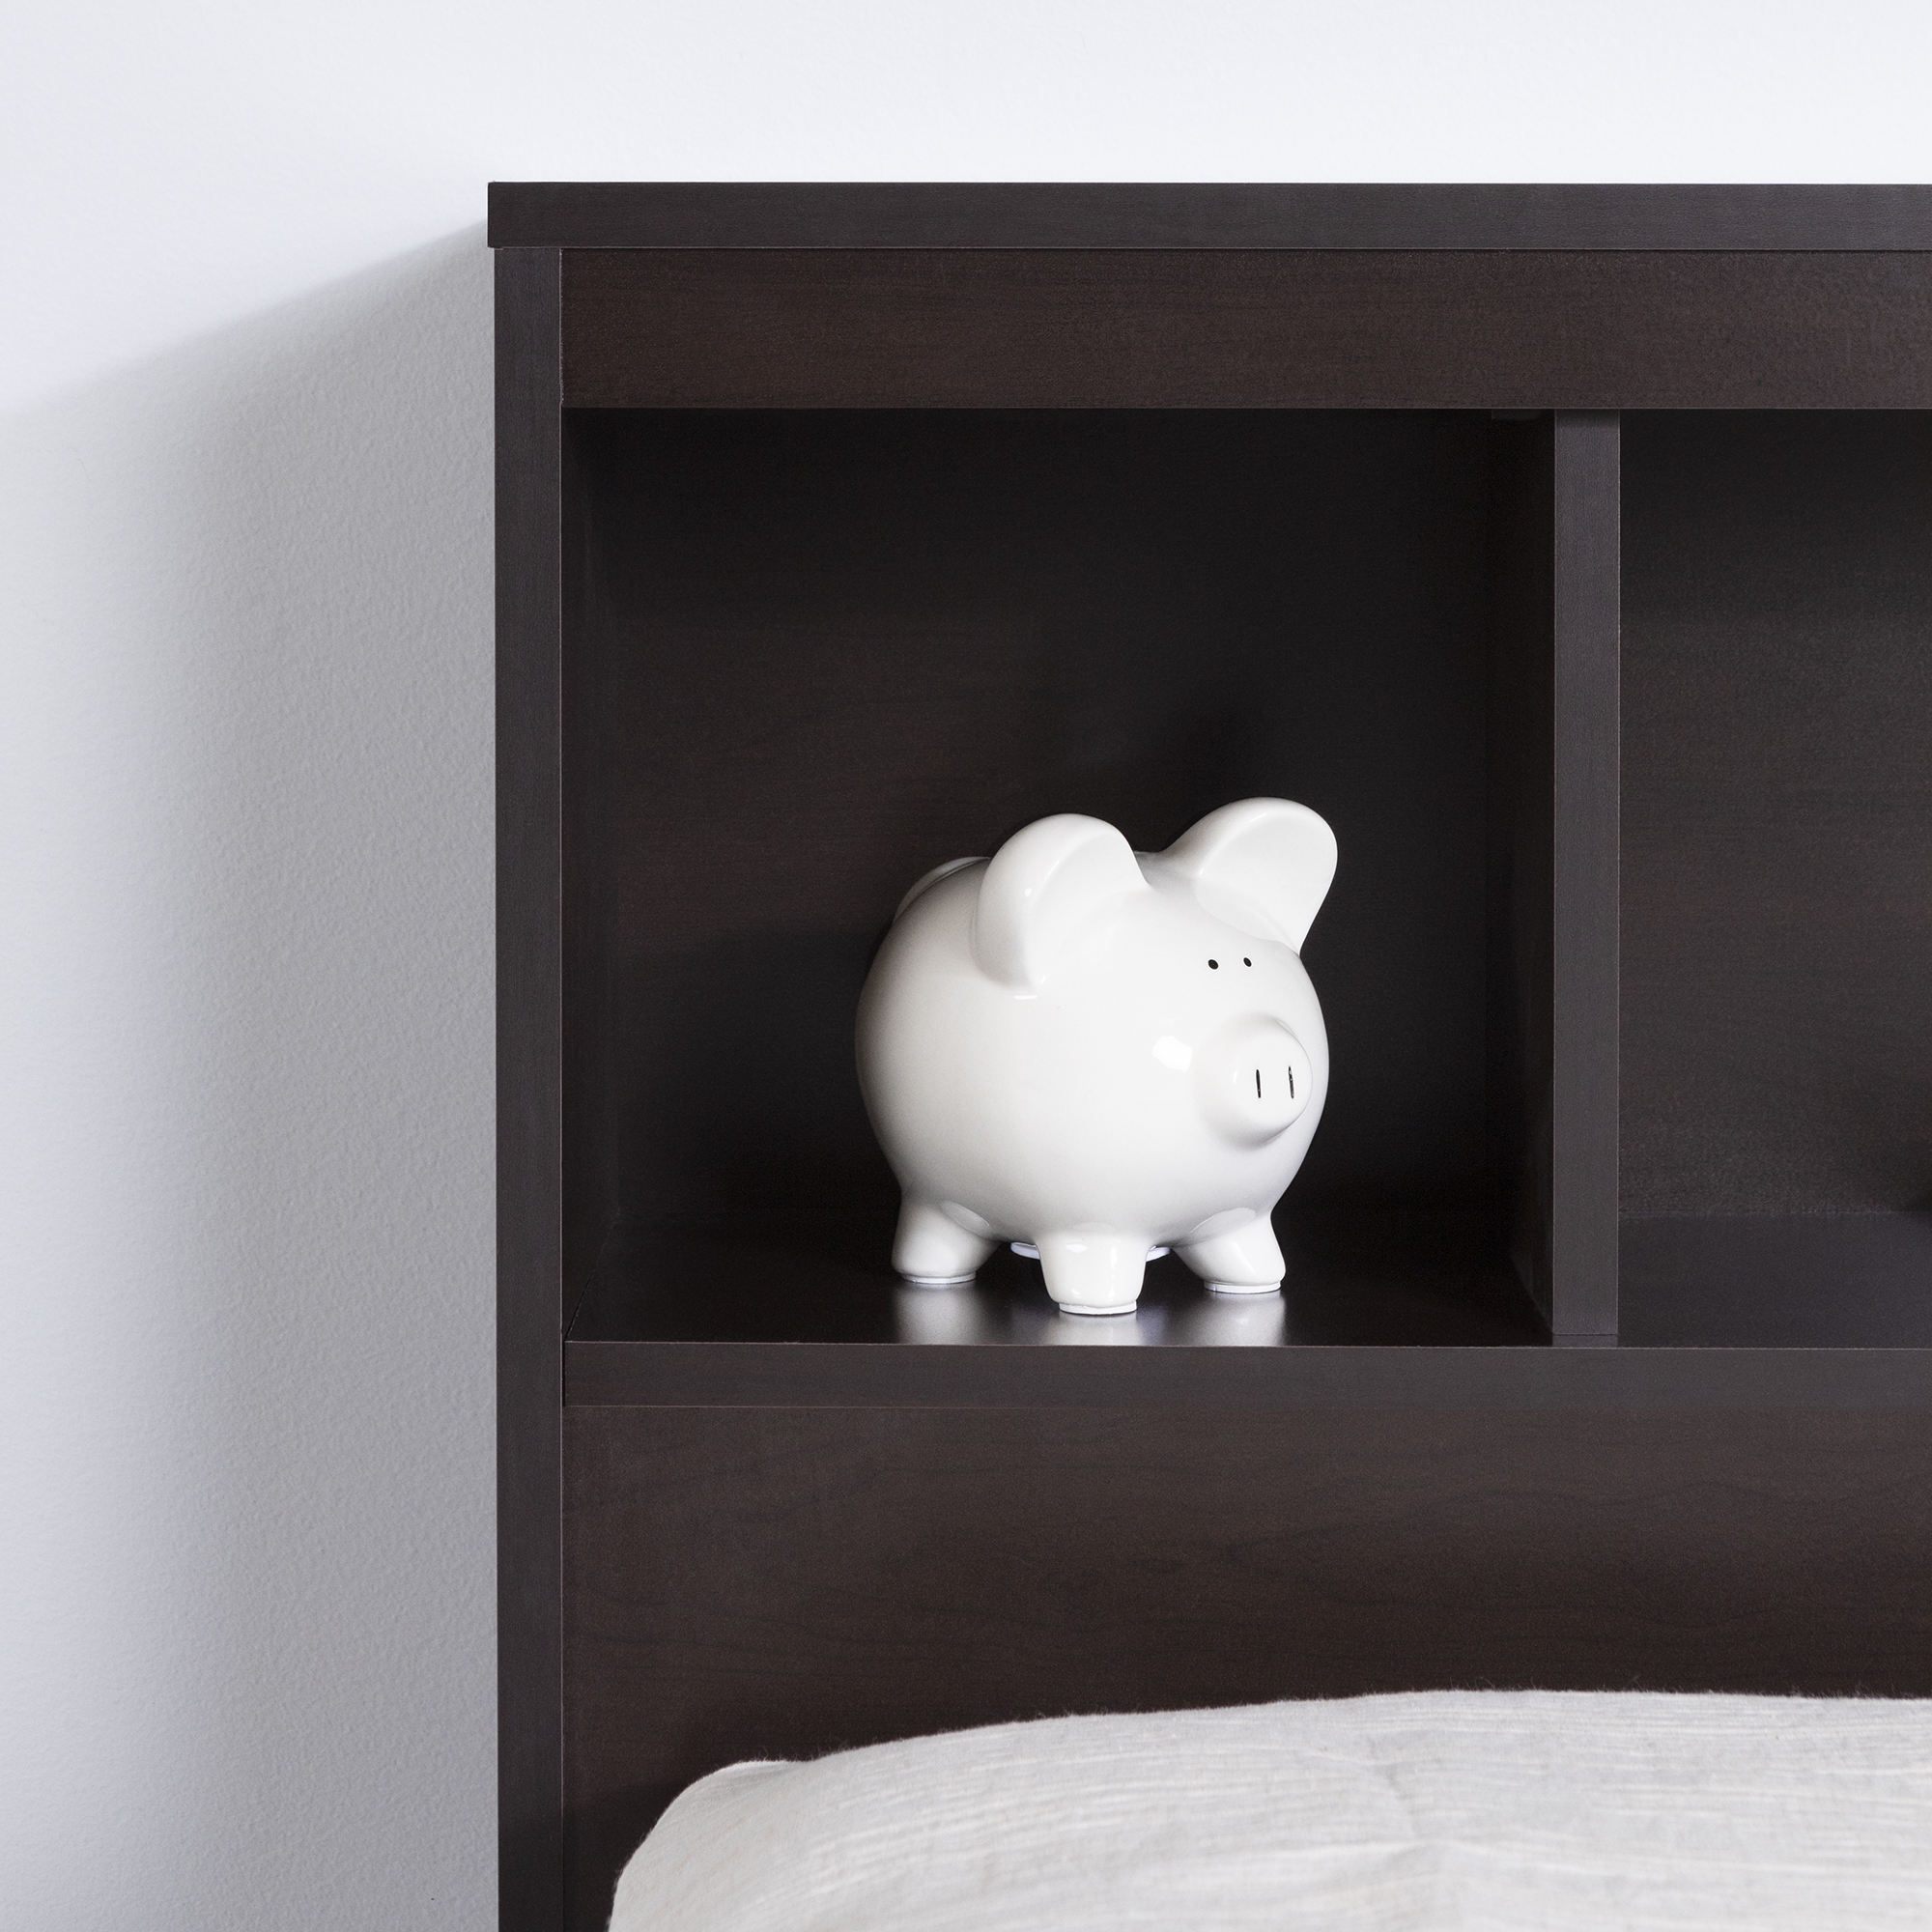 South Shore Spark Kid's Bookcase Headboard, Twin, Chocolate - image 3 of 10